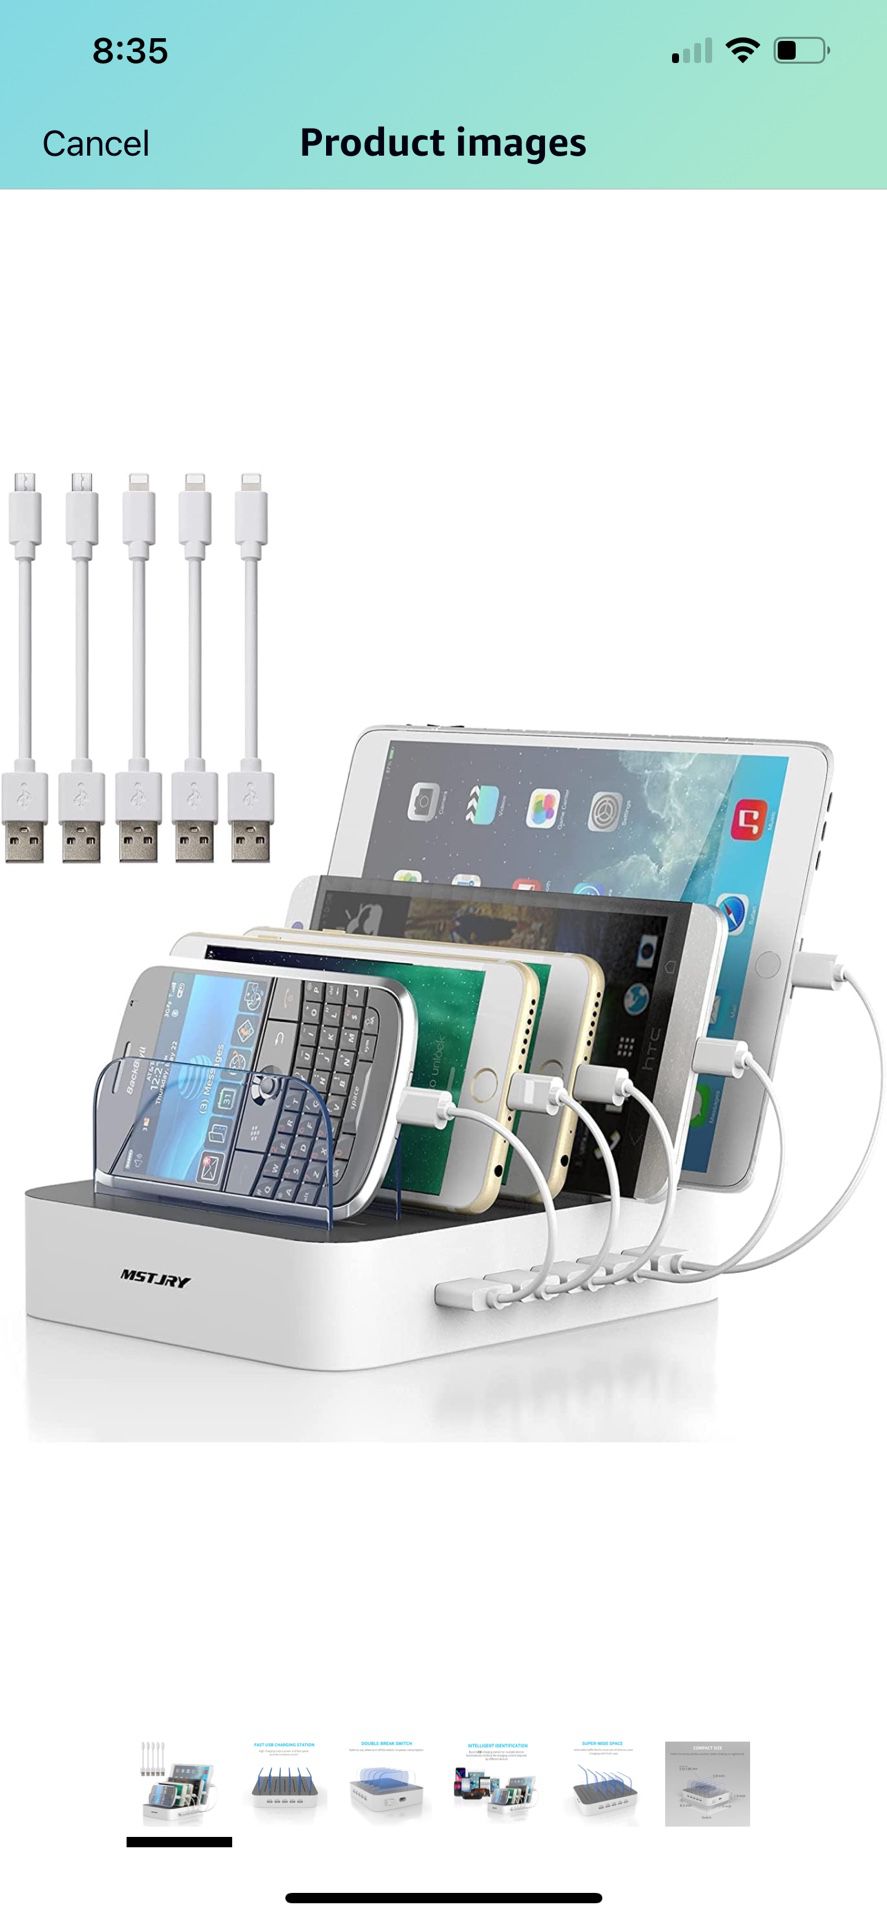 Charging Station for Multiple Devices, MSTJRY 5 Port Multi USB Charger Station with Power Switch Designed for iPhone iPad Cell Phone Tablets (White, 6